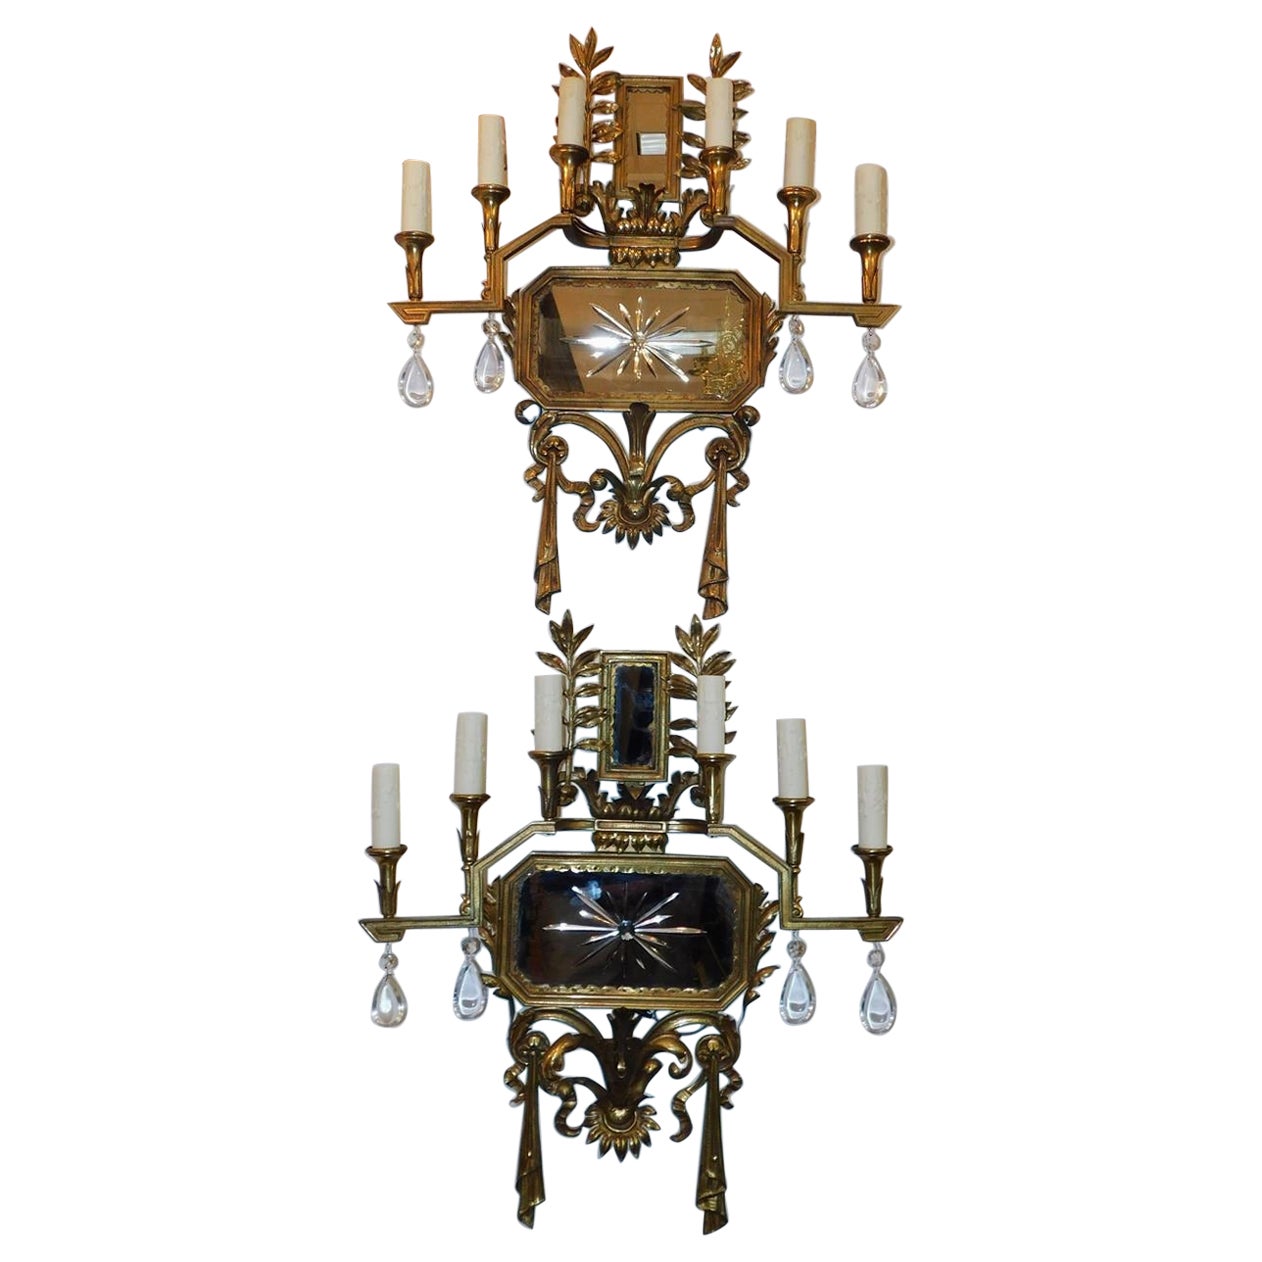 Pair of American Gilt Bronze & Star Mirrored Wall Sconces, Caldwell & Co. C 1870